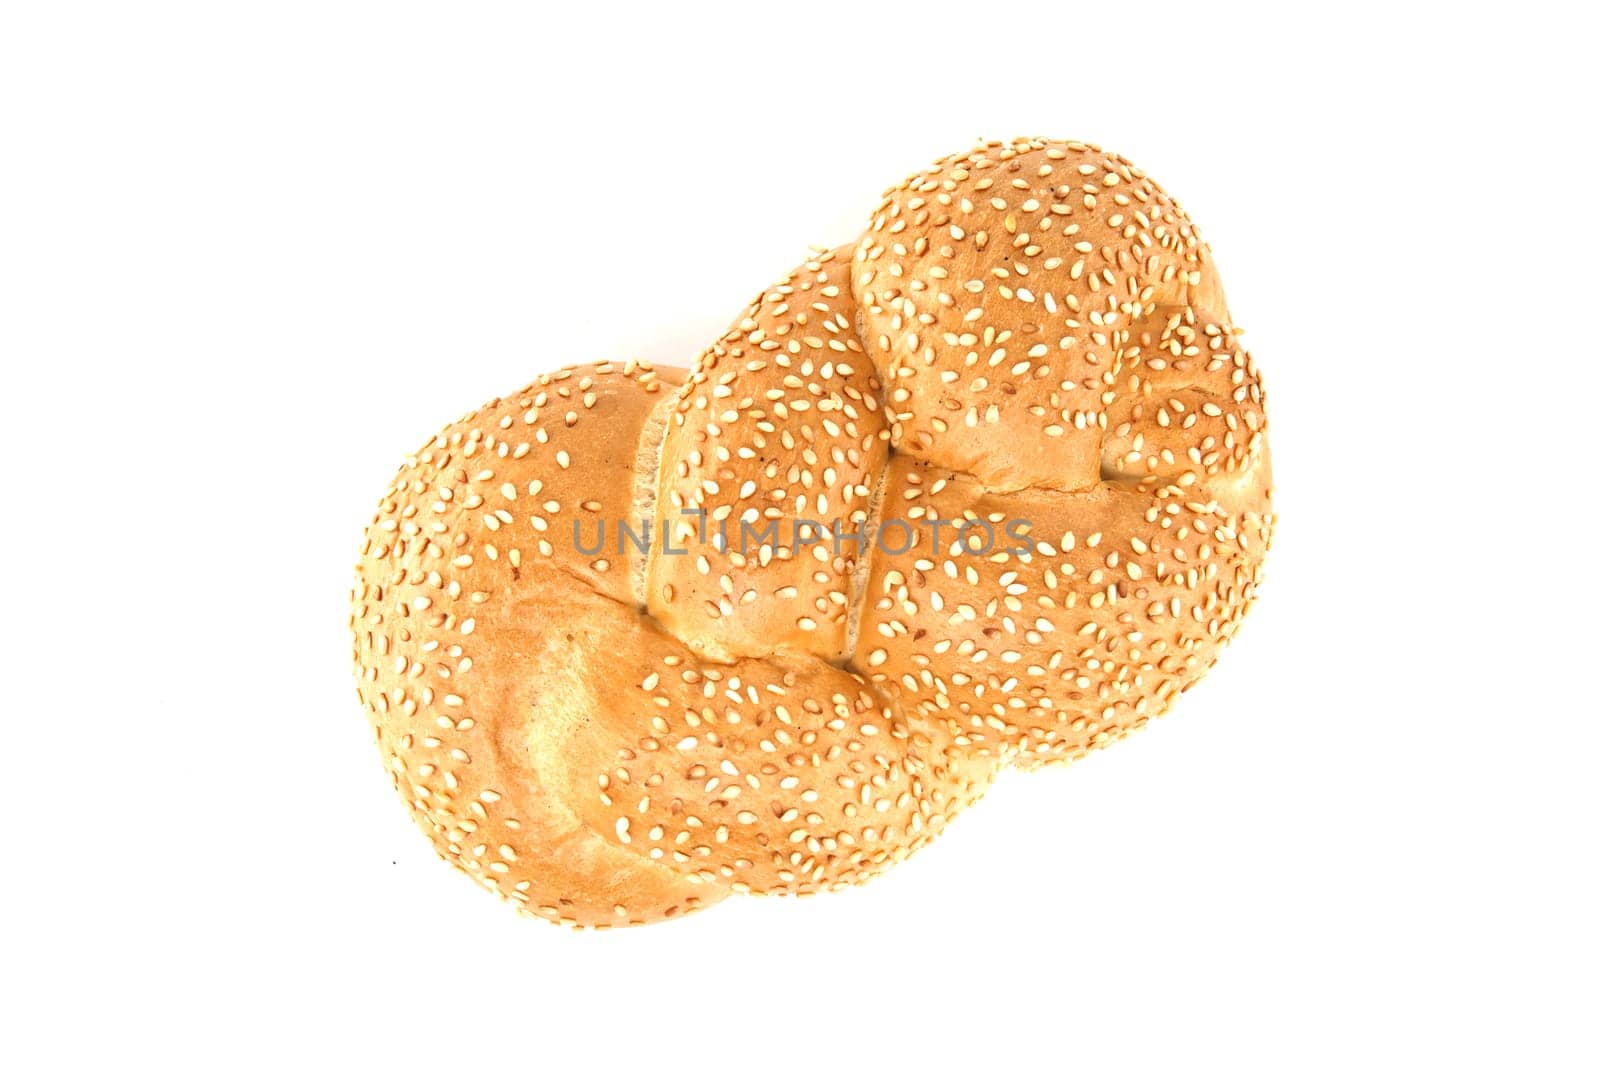 Braided sesame bun isolated on white by NetPix